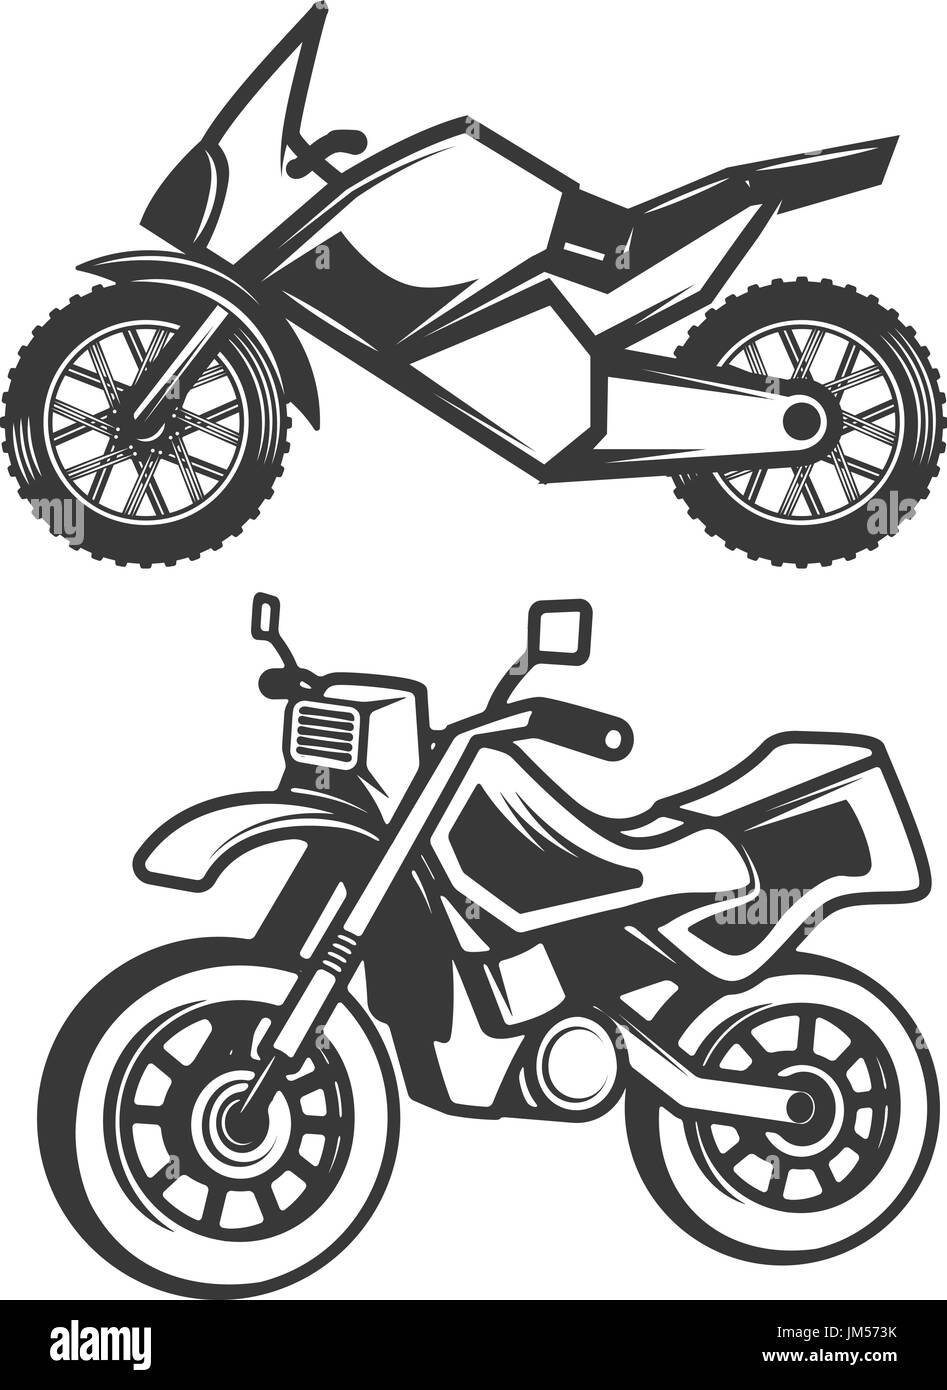 Set of motorcycle icons isolated on white background. Design element for logo, label, emblem, sign, brand mark. Vector illustration. Stock Vector